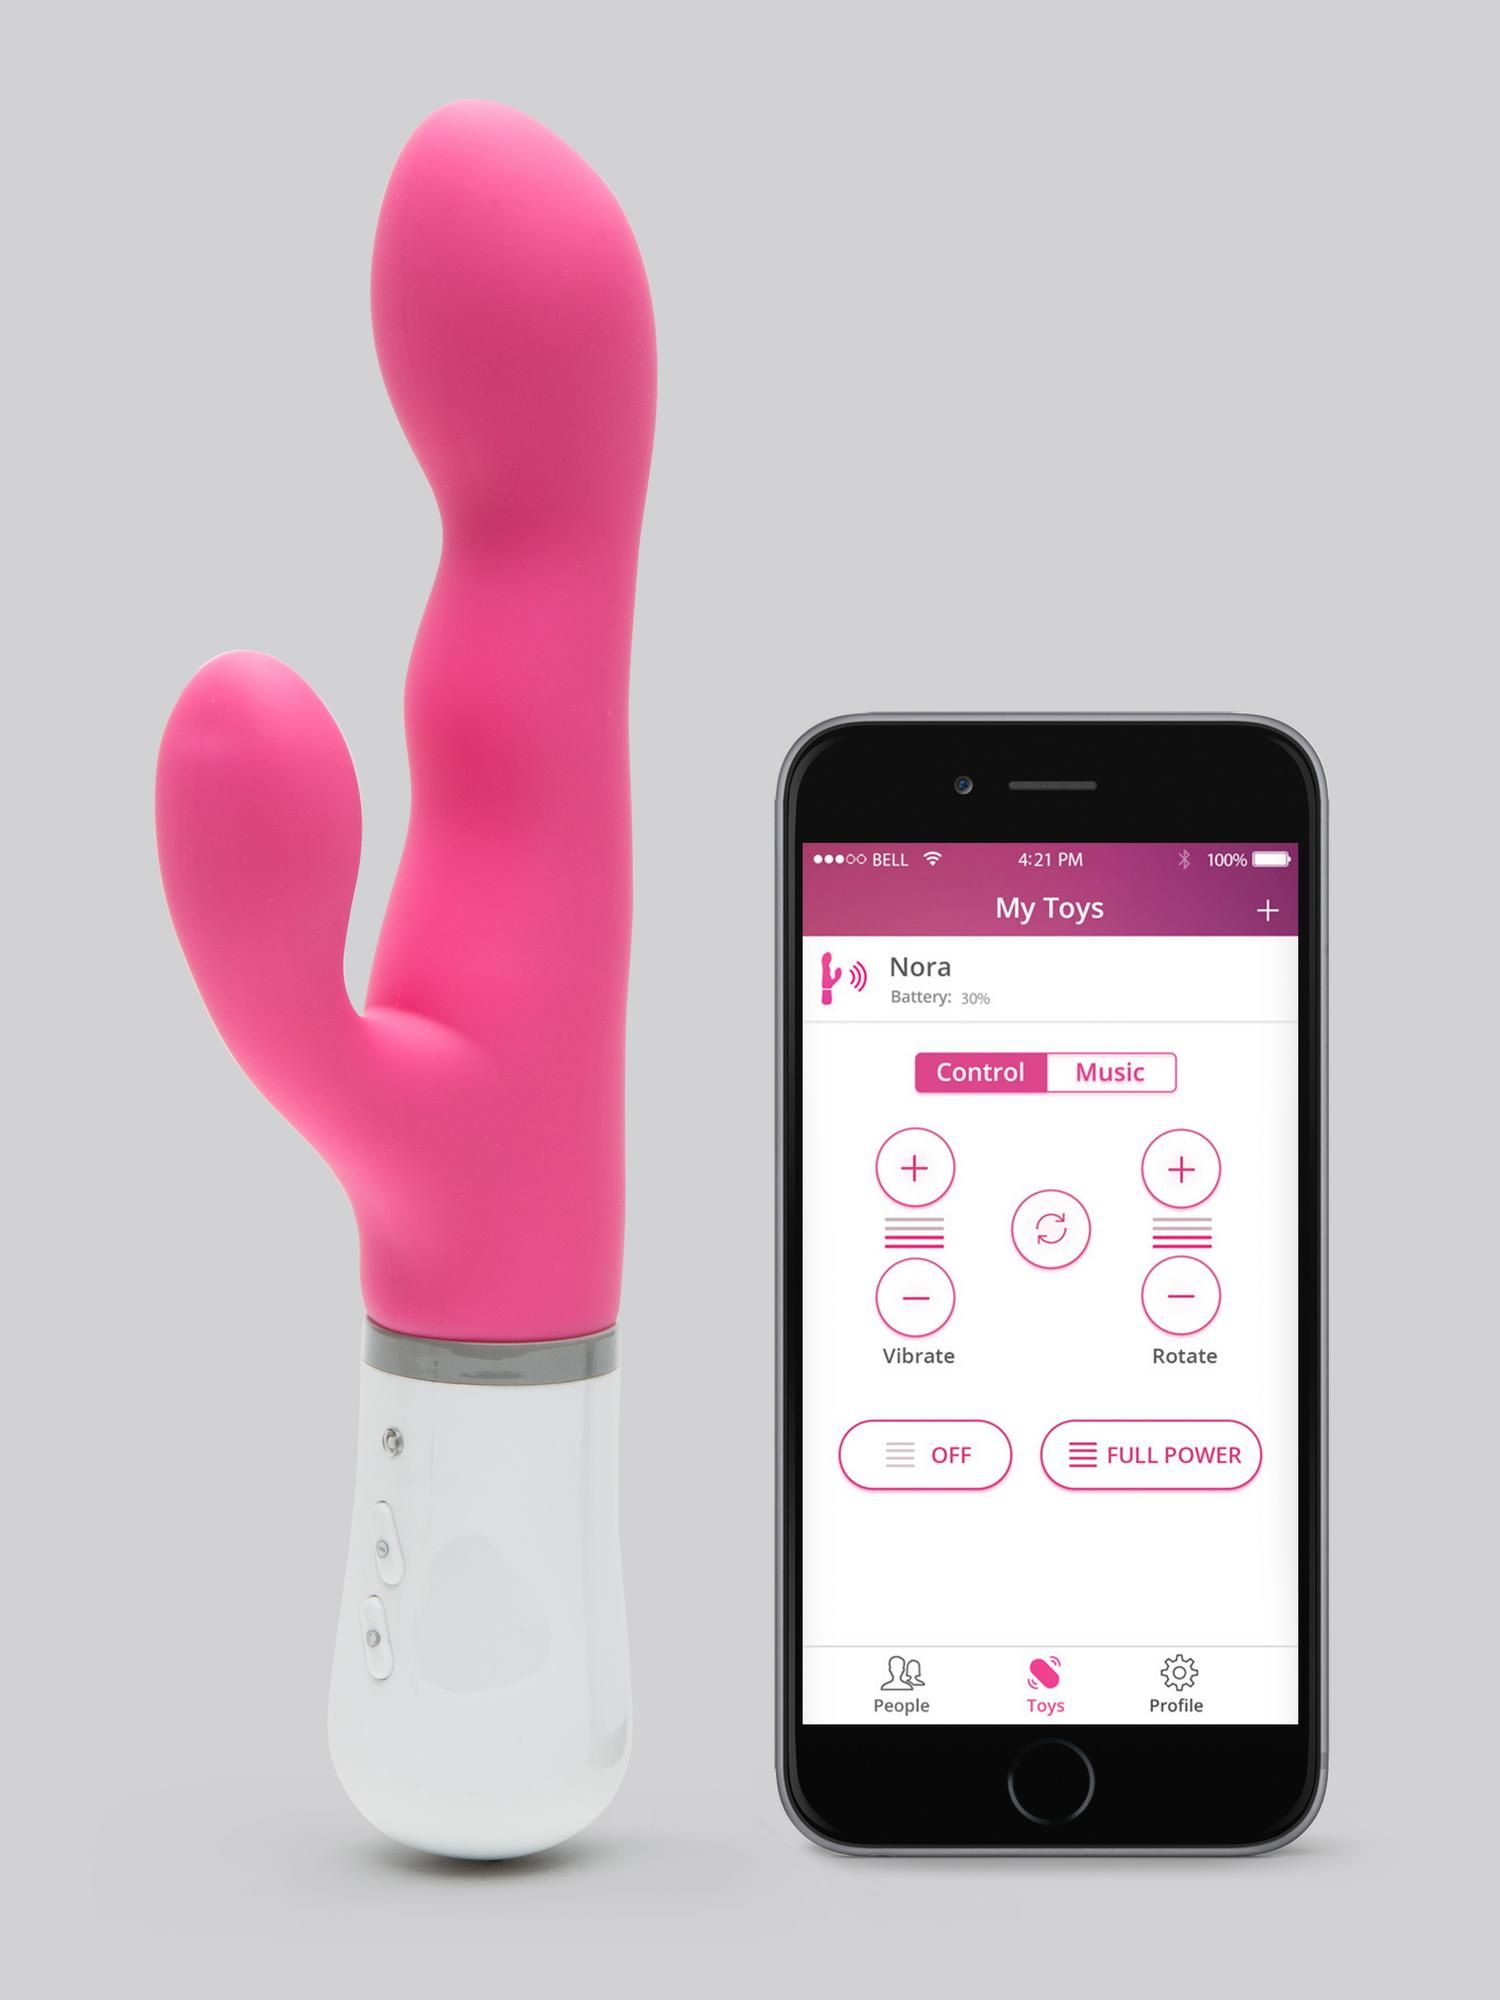 Our little submissive sex toy